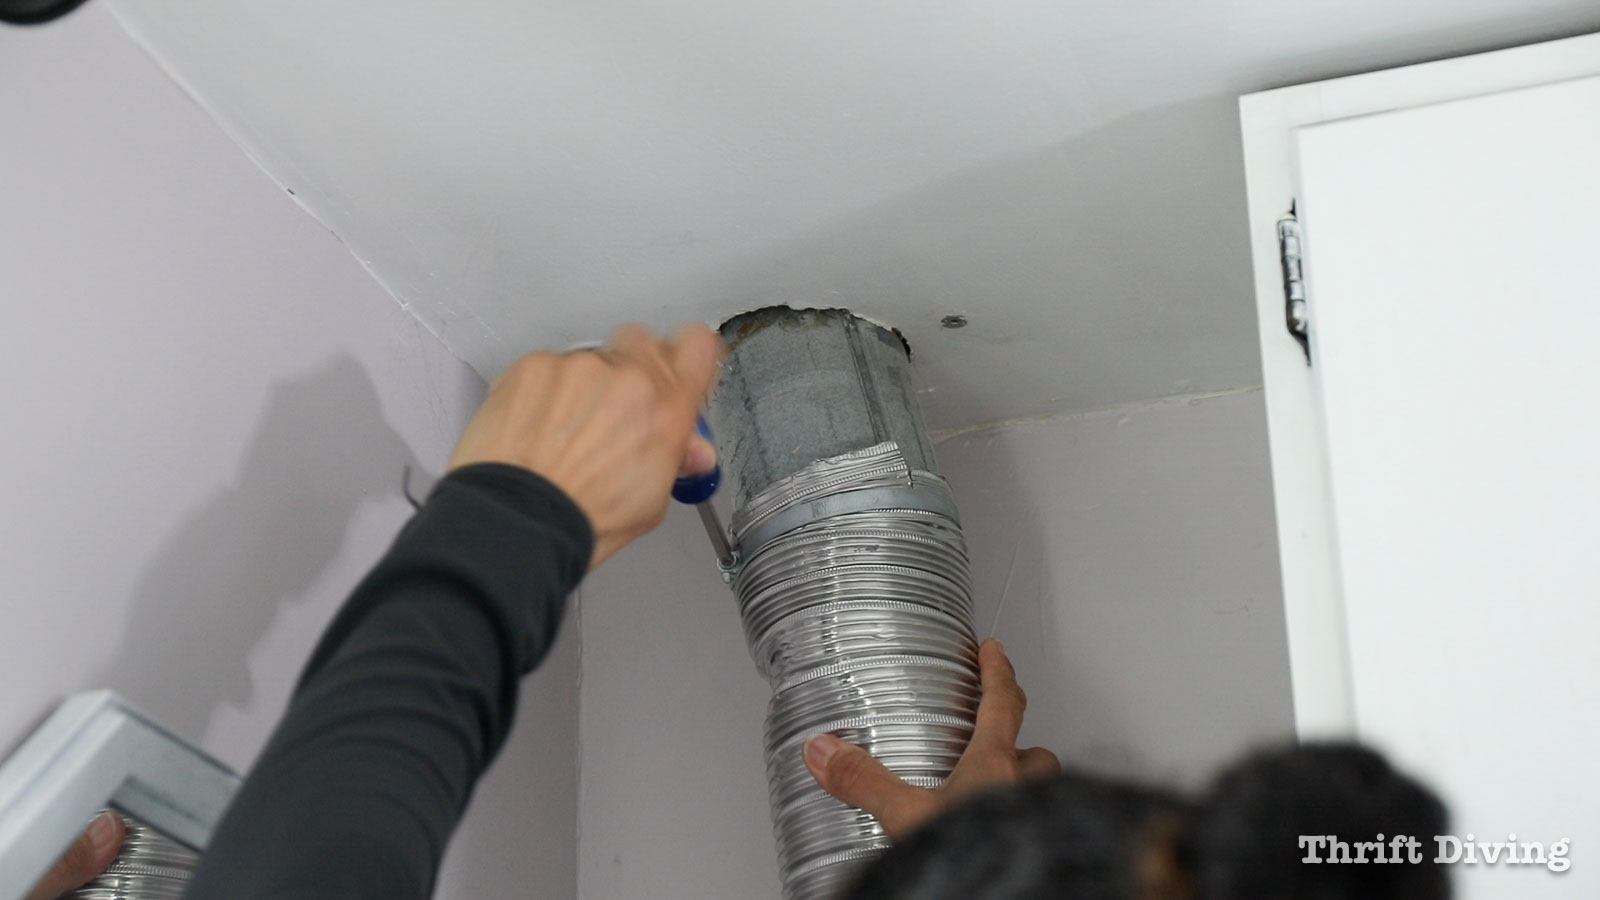 Removing the dryer hose before cleaning dryer vents. - 7 Home Maintenance Tasks - Thrift Diving